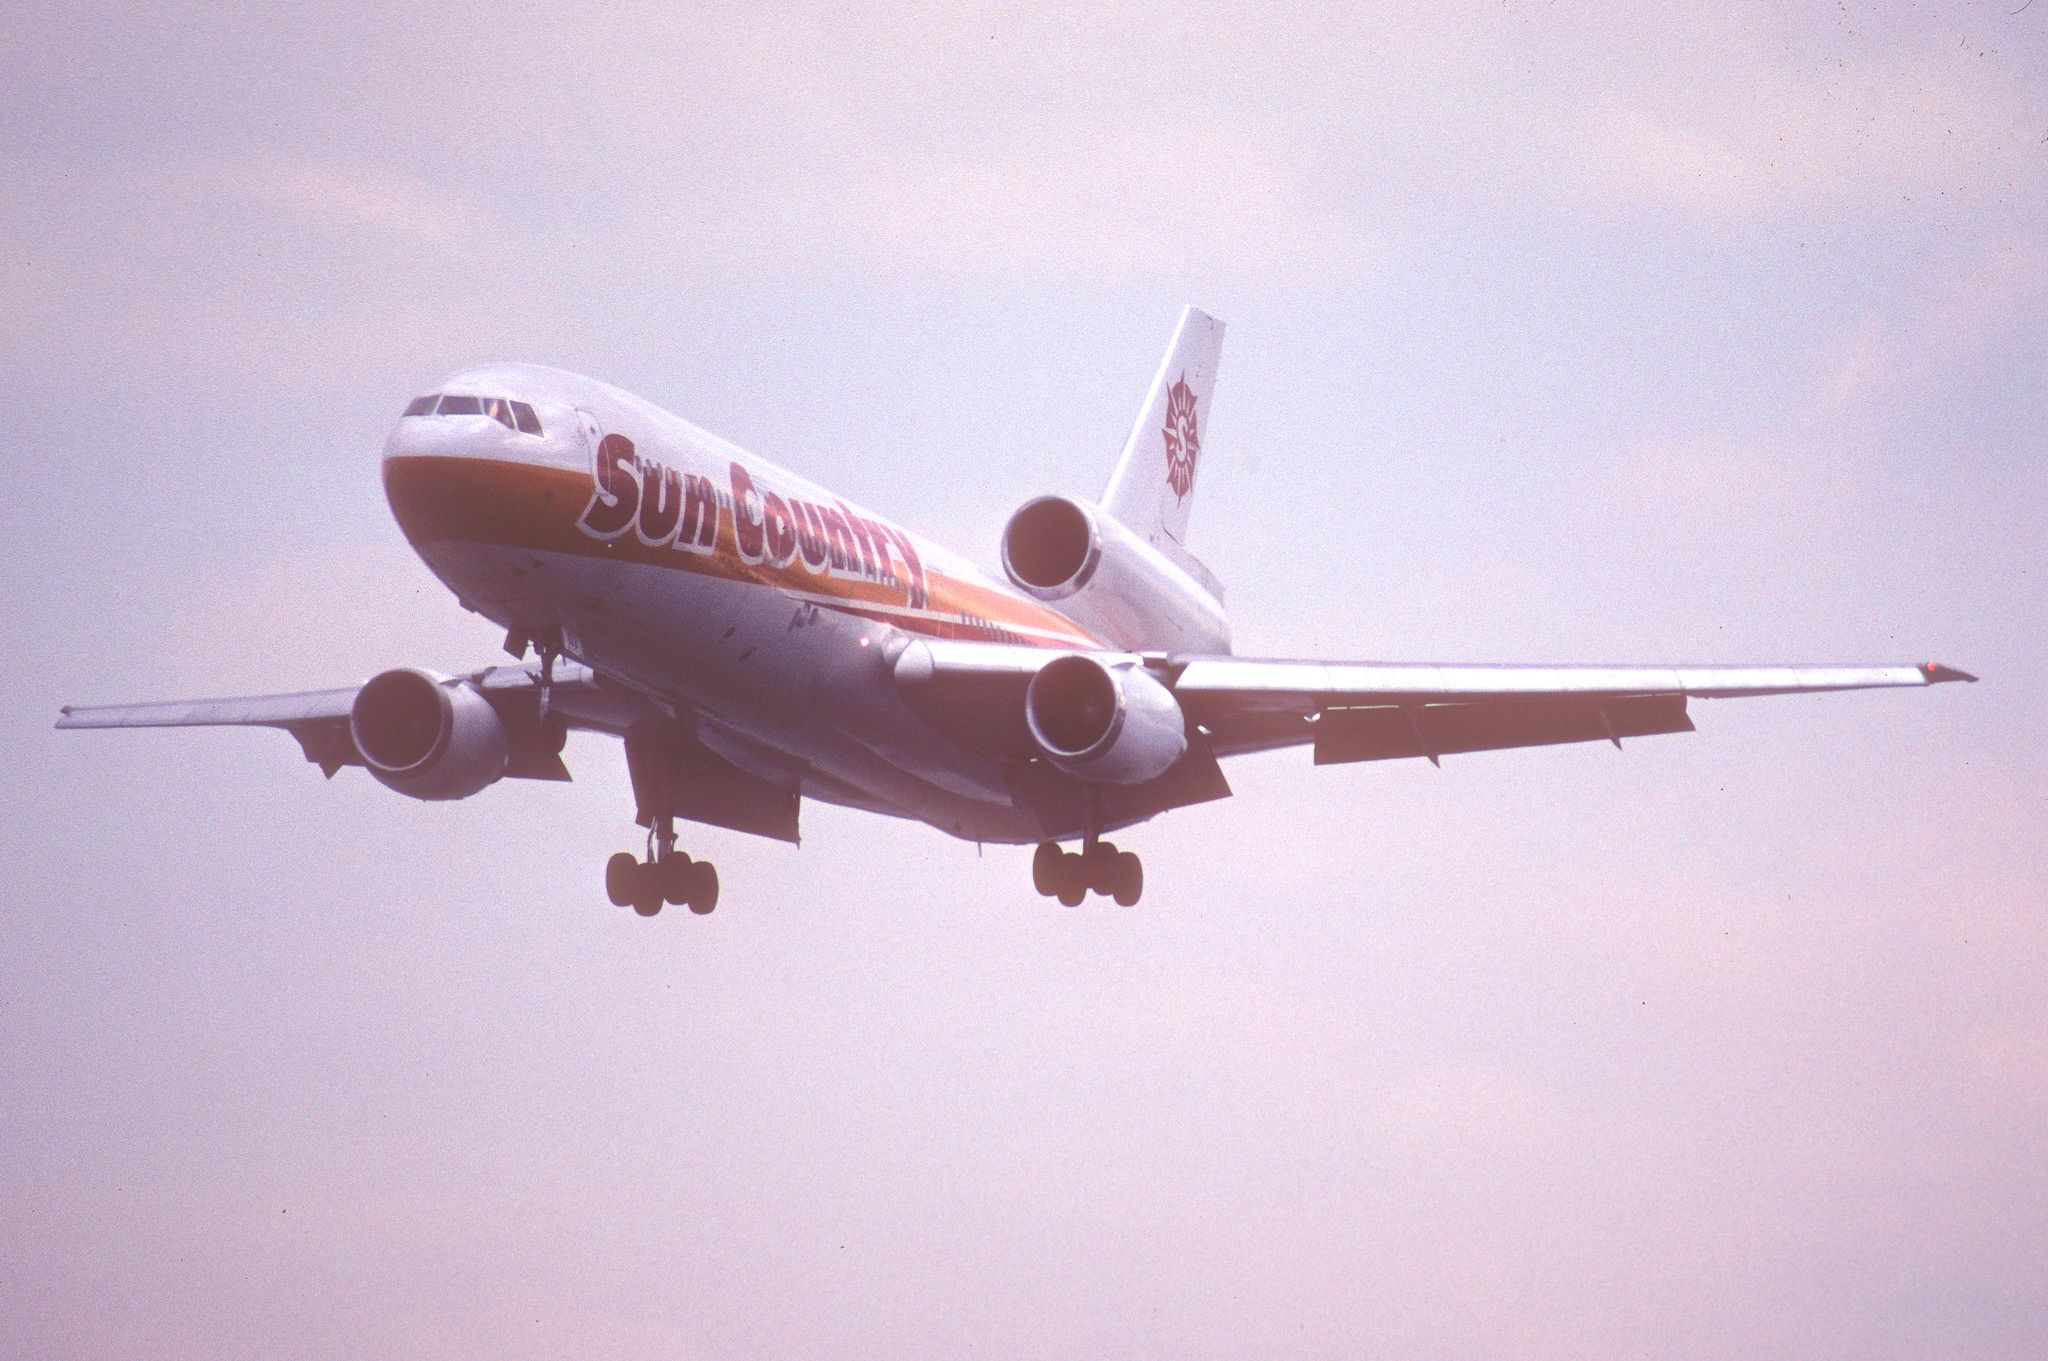 Sun Country DC-10